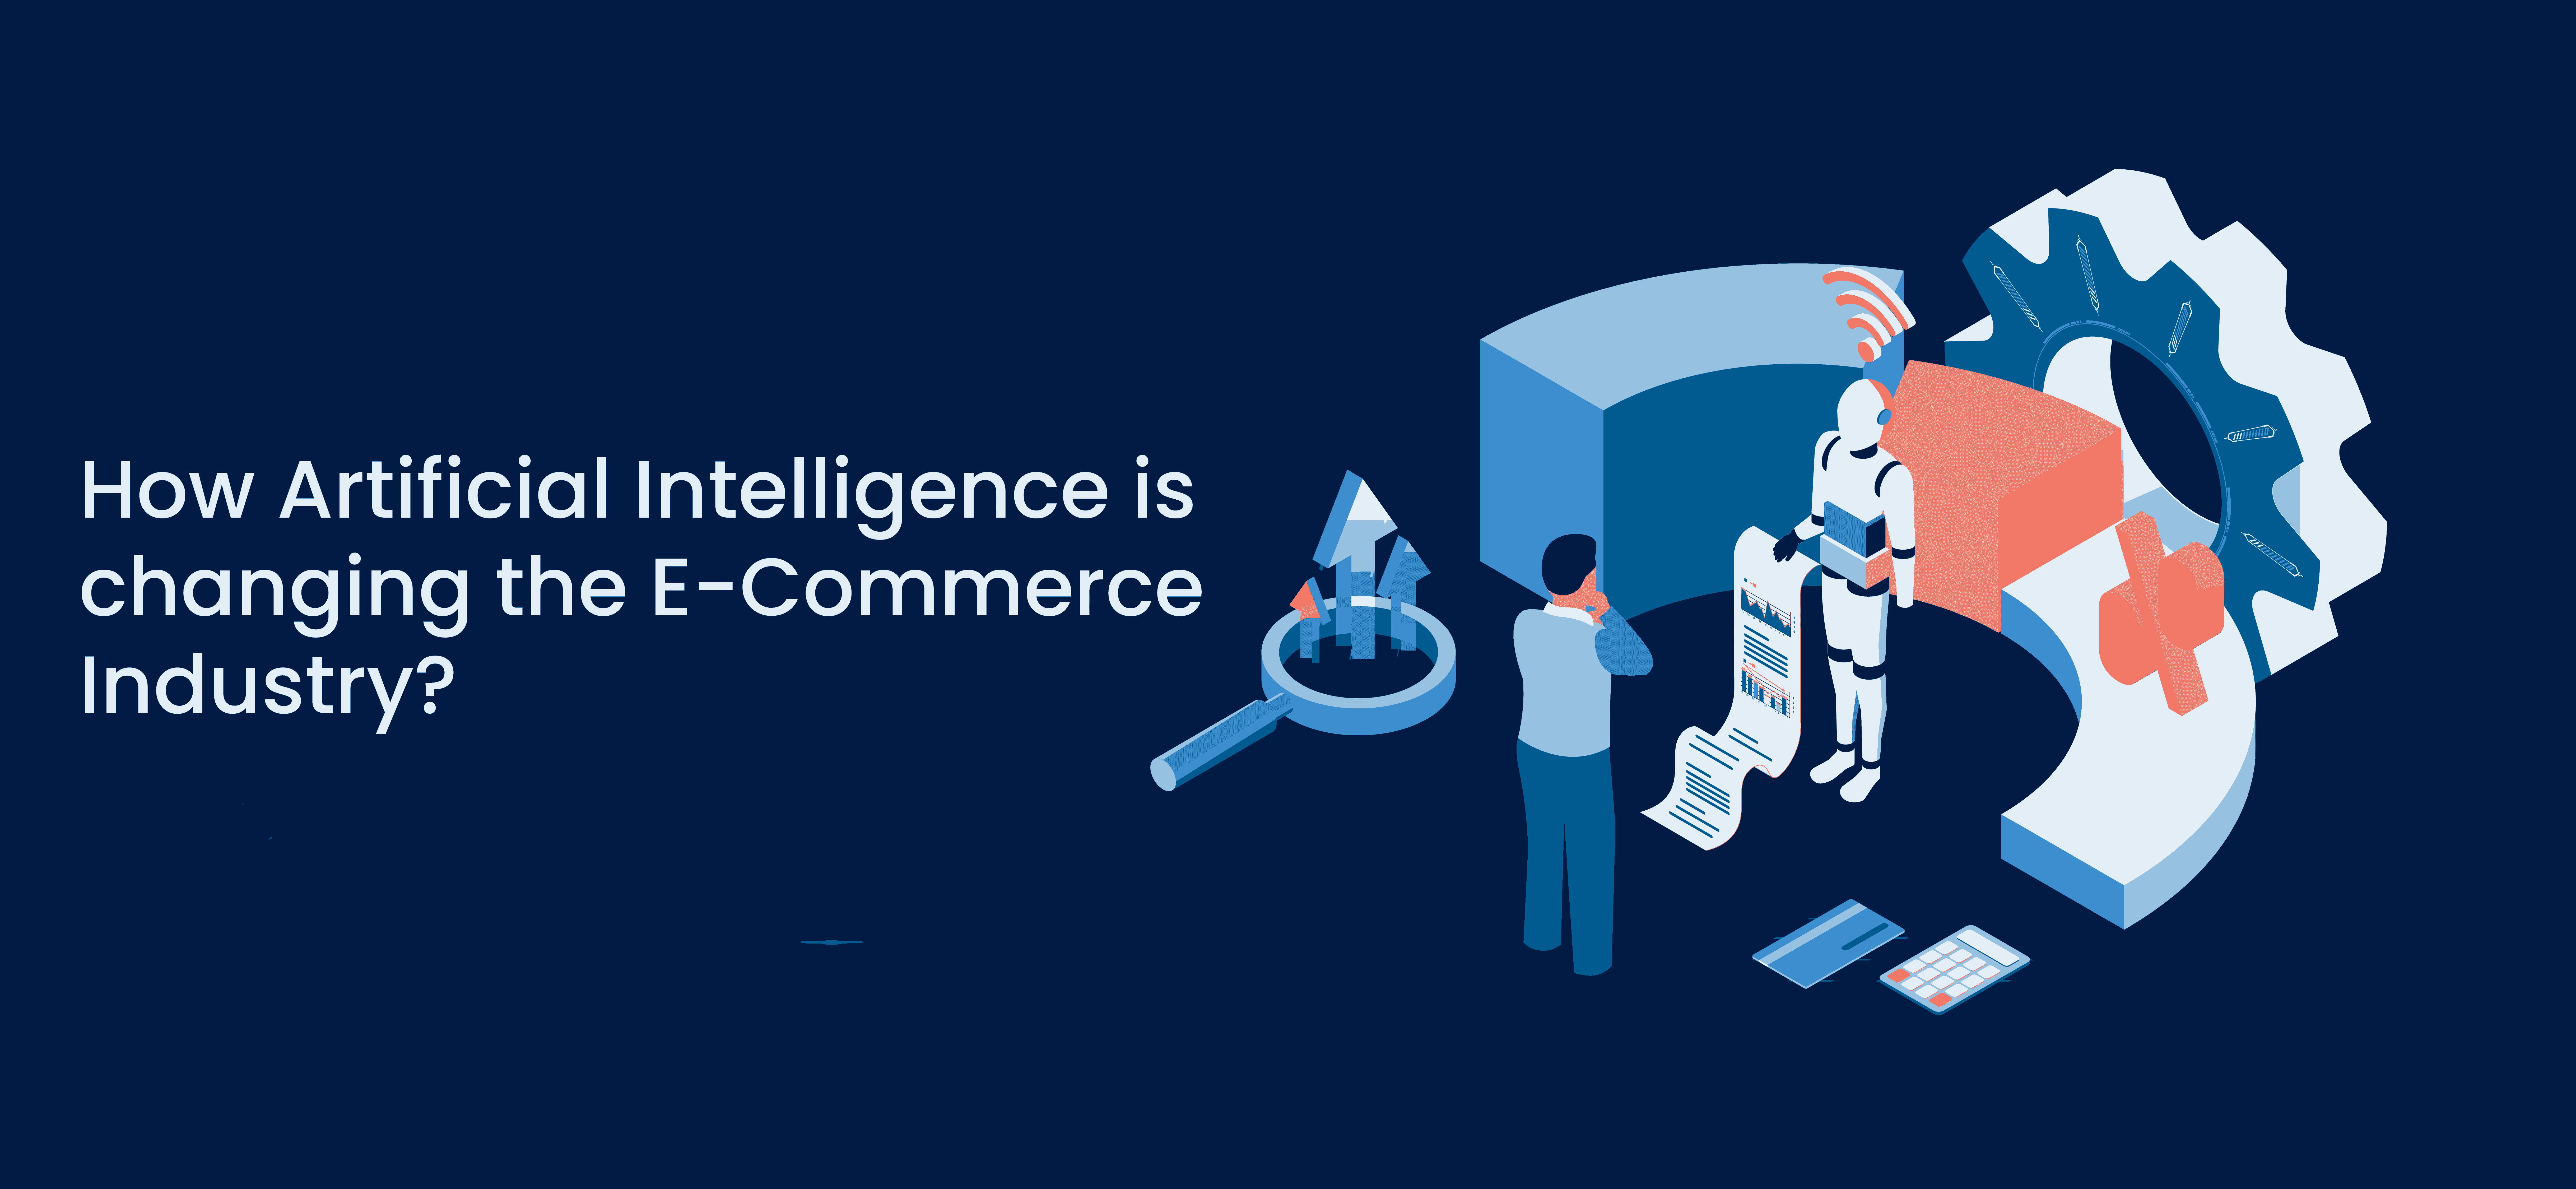 How Artificial Intelligence is changing the E-Commerce Industry?